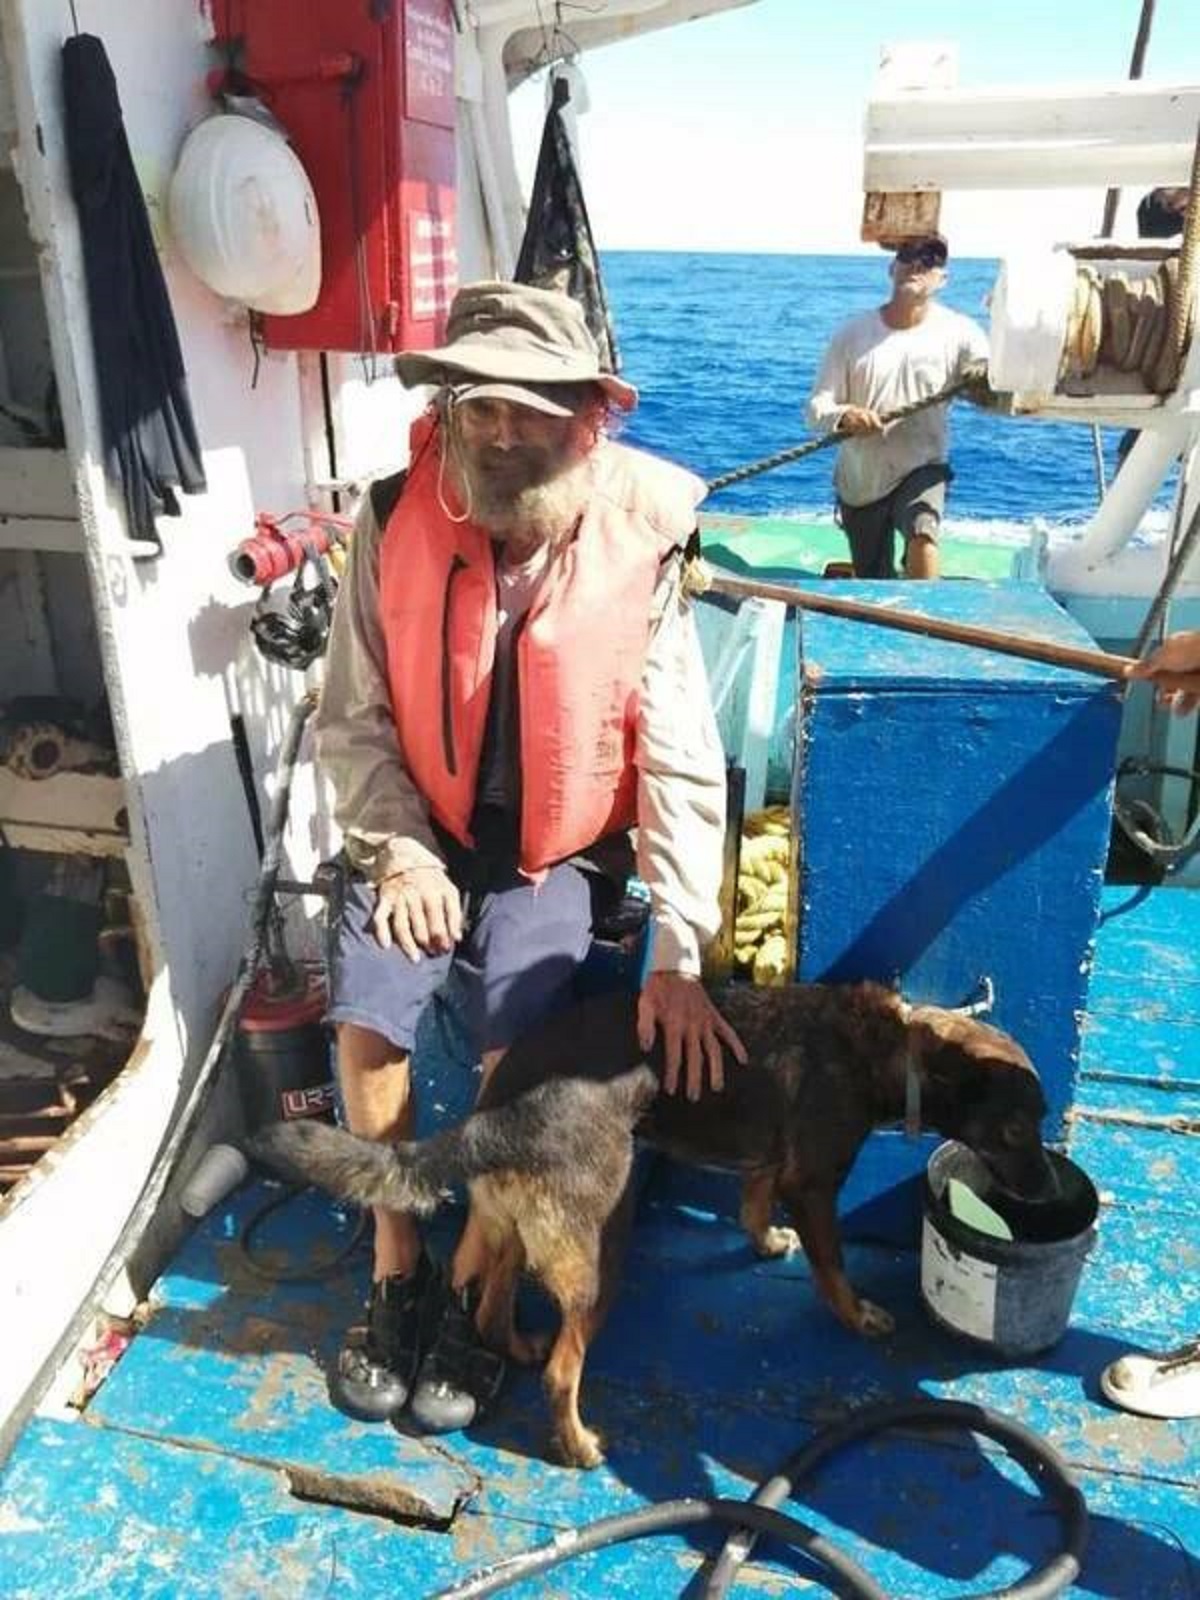 "51 years old Tim Shaddock and his dog Bella rescued off the coast in Mexico after being stranded in the Pacific Ocean for months and they survived by consuming raw fish and drinking rainwater"